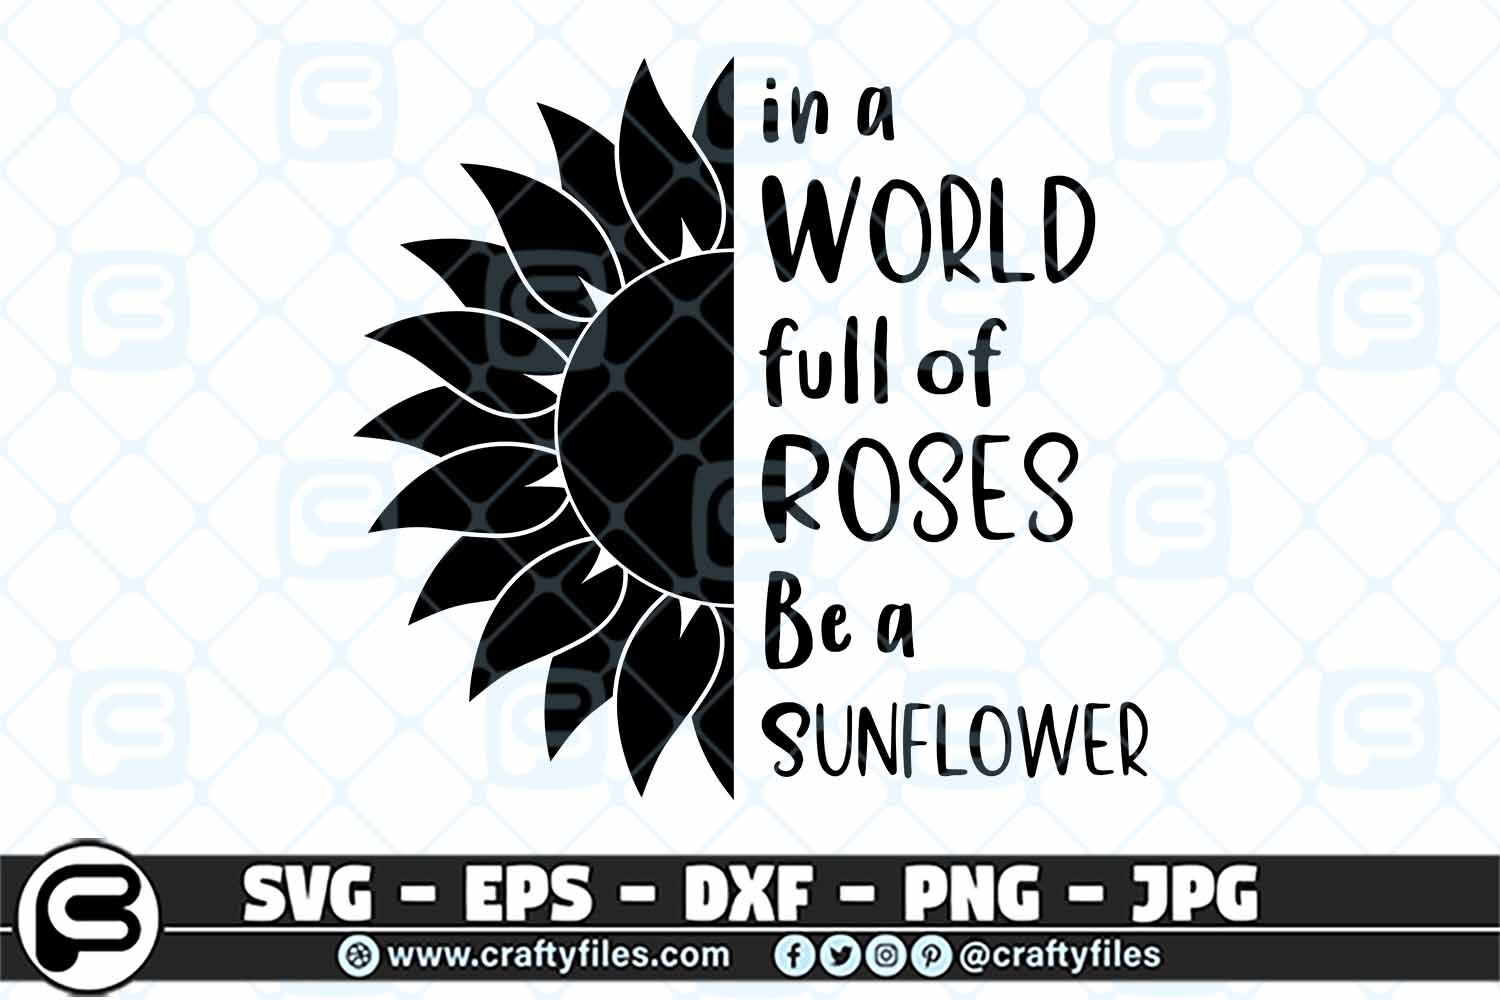 Download In A World Full Of Roses Be A Sunflower Svg Cut File Rose Svg By Crafty Files Thehungryjpeg Com